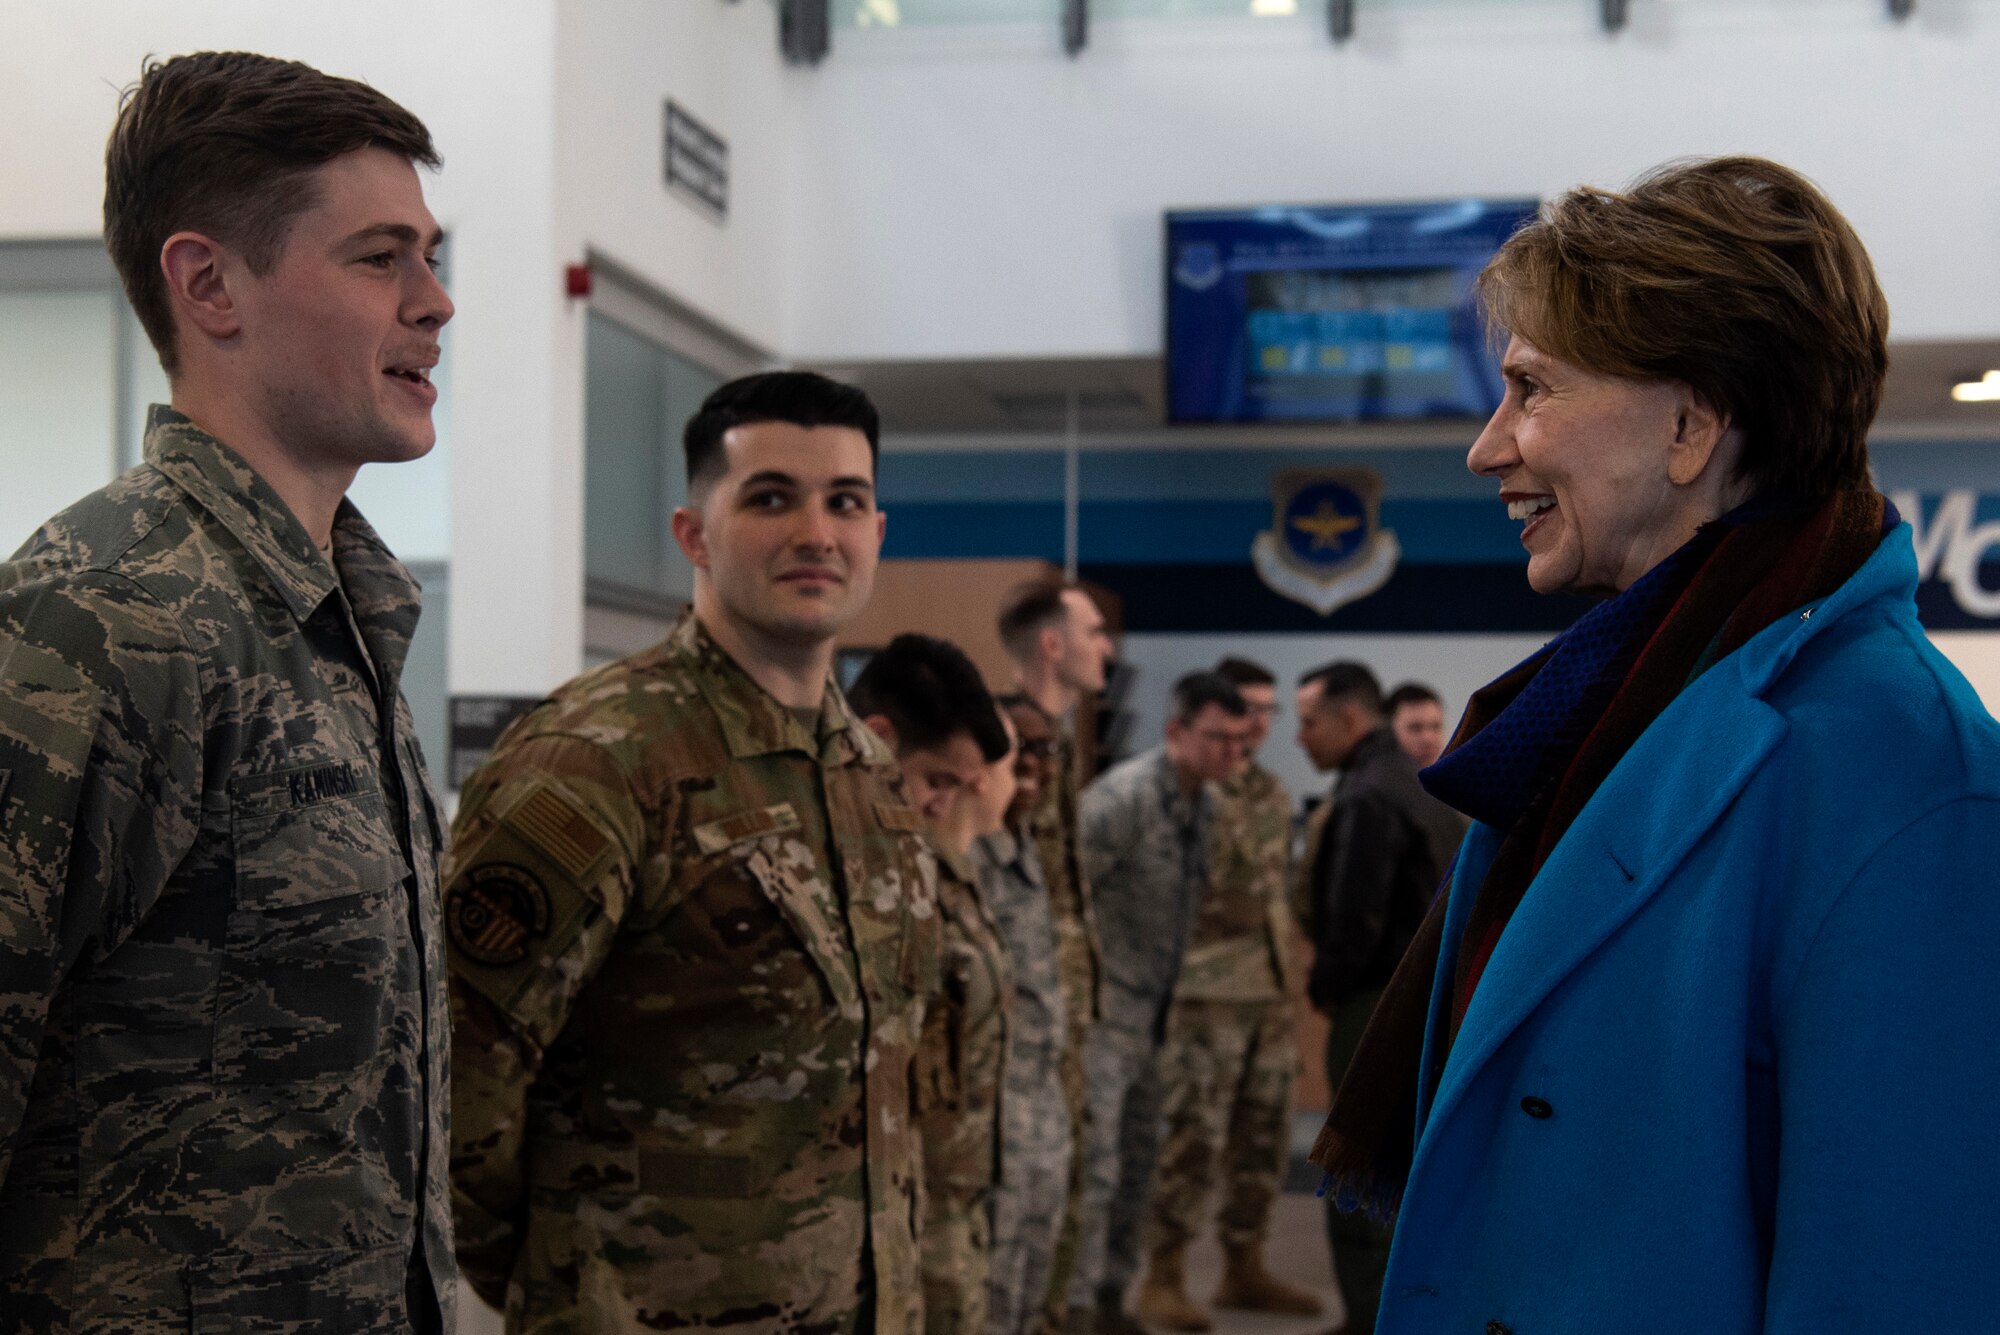 Secretary of the Air Force Barbara M. Barrett speaks with U.S. Air Force Airmen from the 52nd Fighter Wing in the passenger terminal at Spangdahlem Air Base, Germany, Feb. 15, 2020. Barrett coined multiple Airmen for their outstanding performance. (U.S. Air Force photo by Airman 1st Class Valerie Seelye)